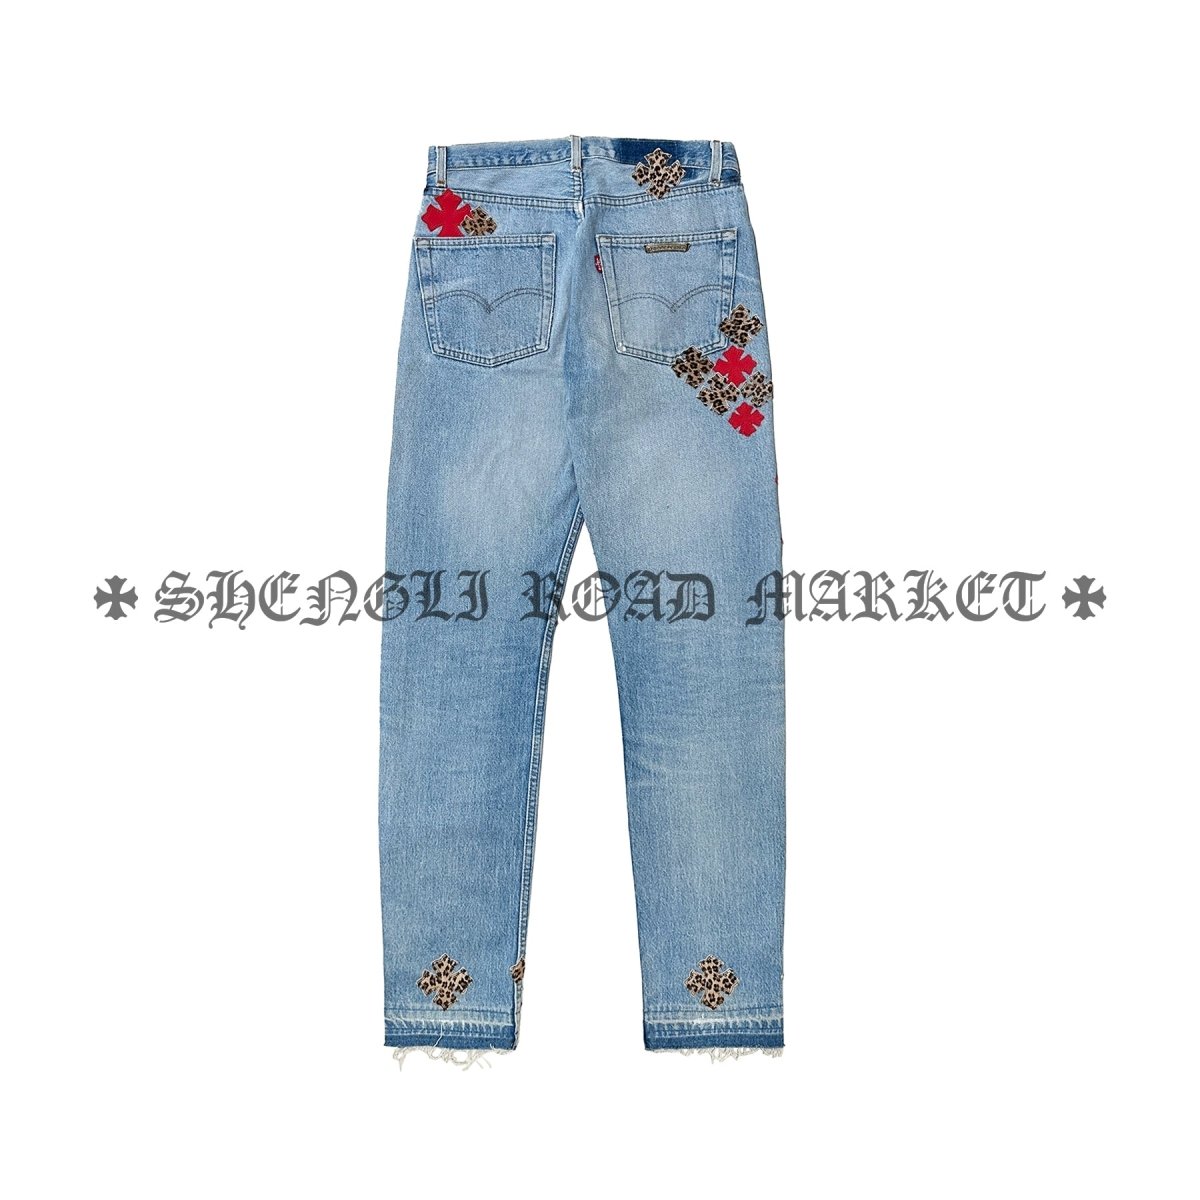 Chrome Hearts 1of1 Suede Red & Leopard Cross Patch Jeans - SHENGLI ROAD MARKET